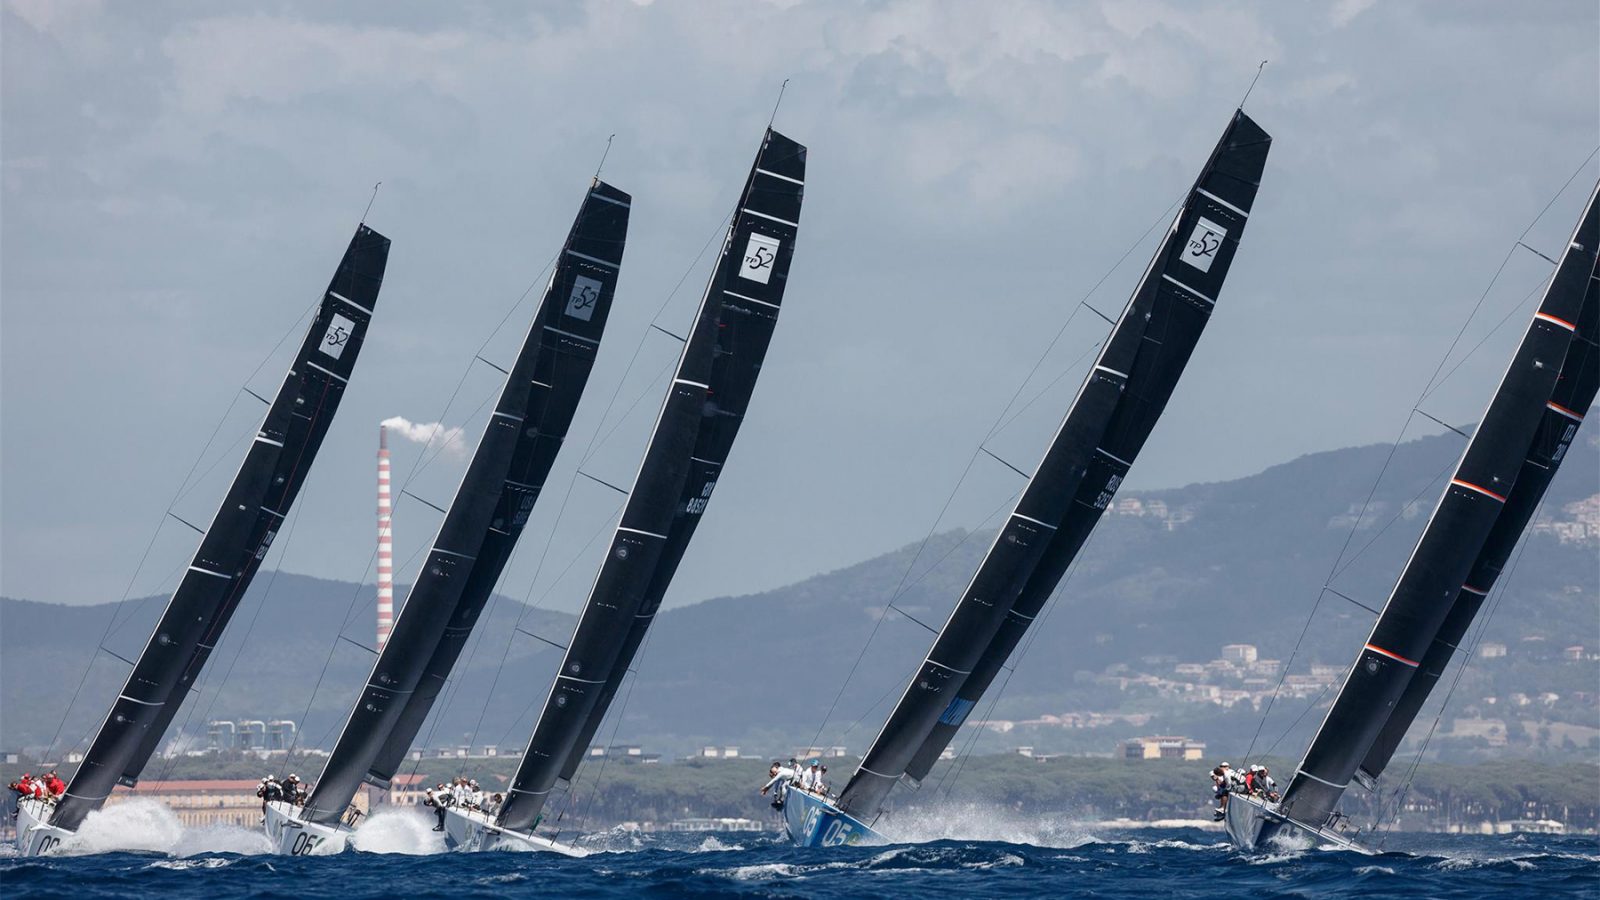 2018 52 SUPER SERIES PREVIEW